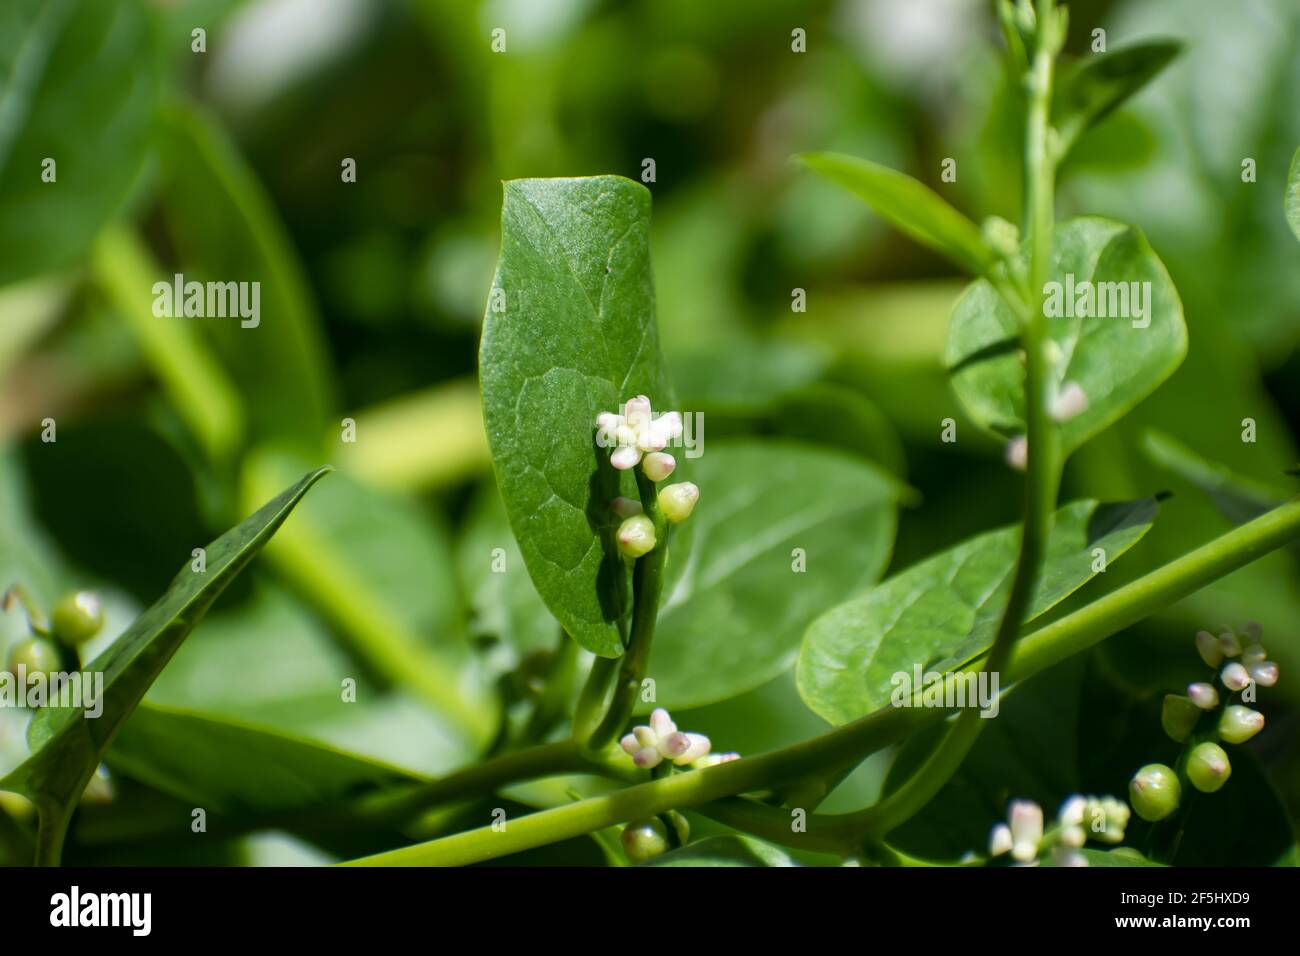 The small white and pink flower of a green Malabar spinach or basella alba perennial vine. The flower grows on a green stem against a leaf. Stock Photo